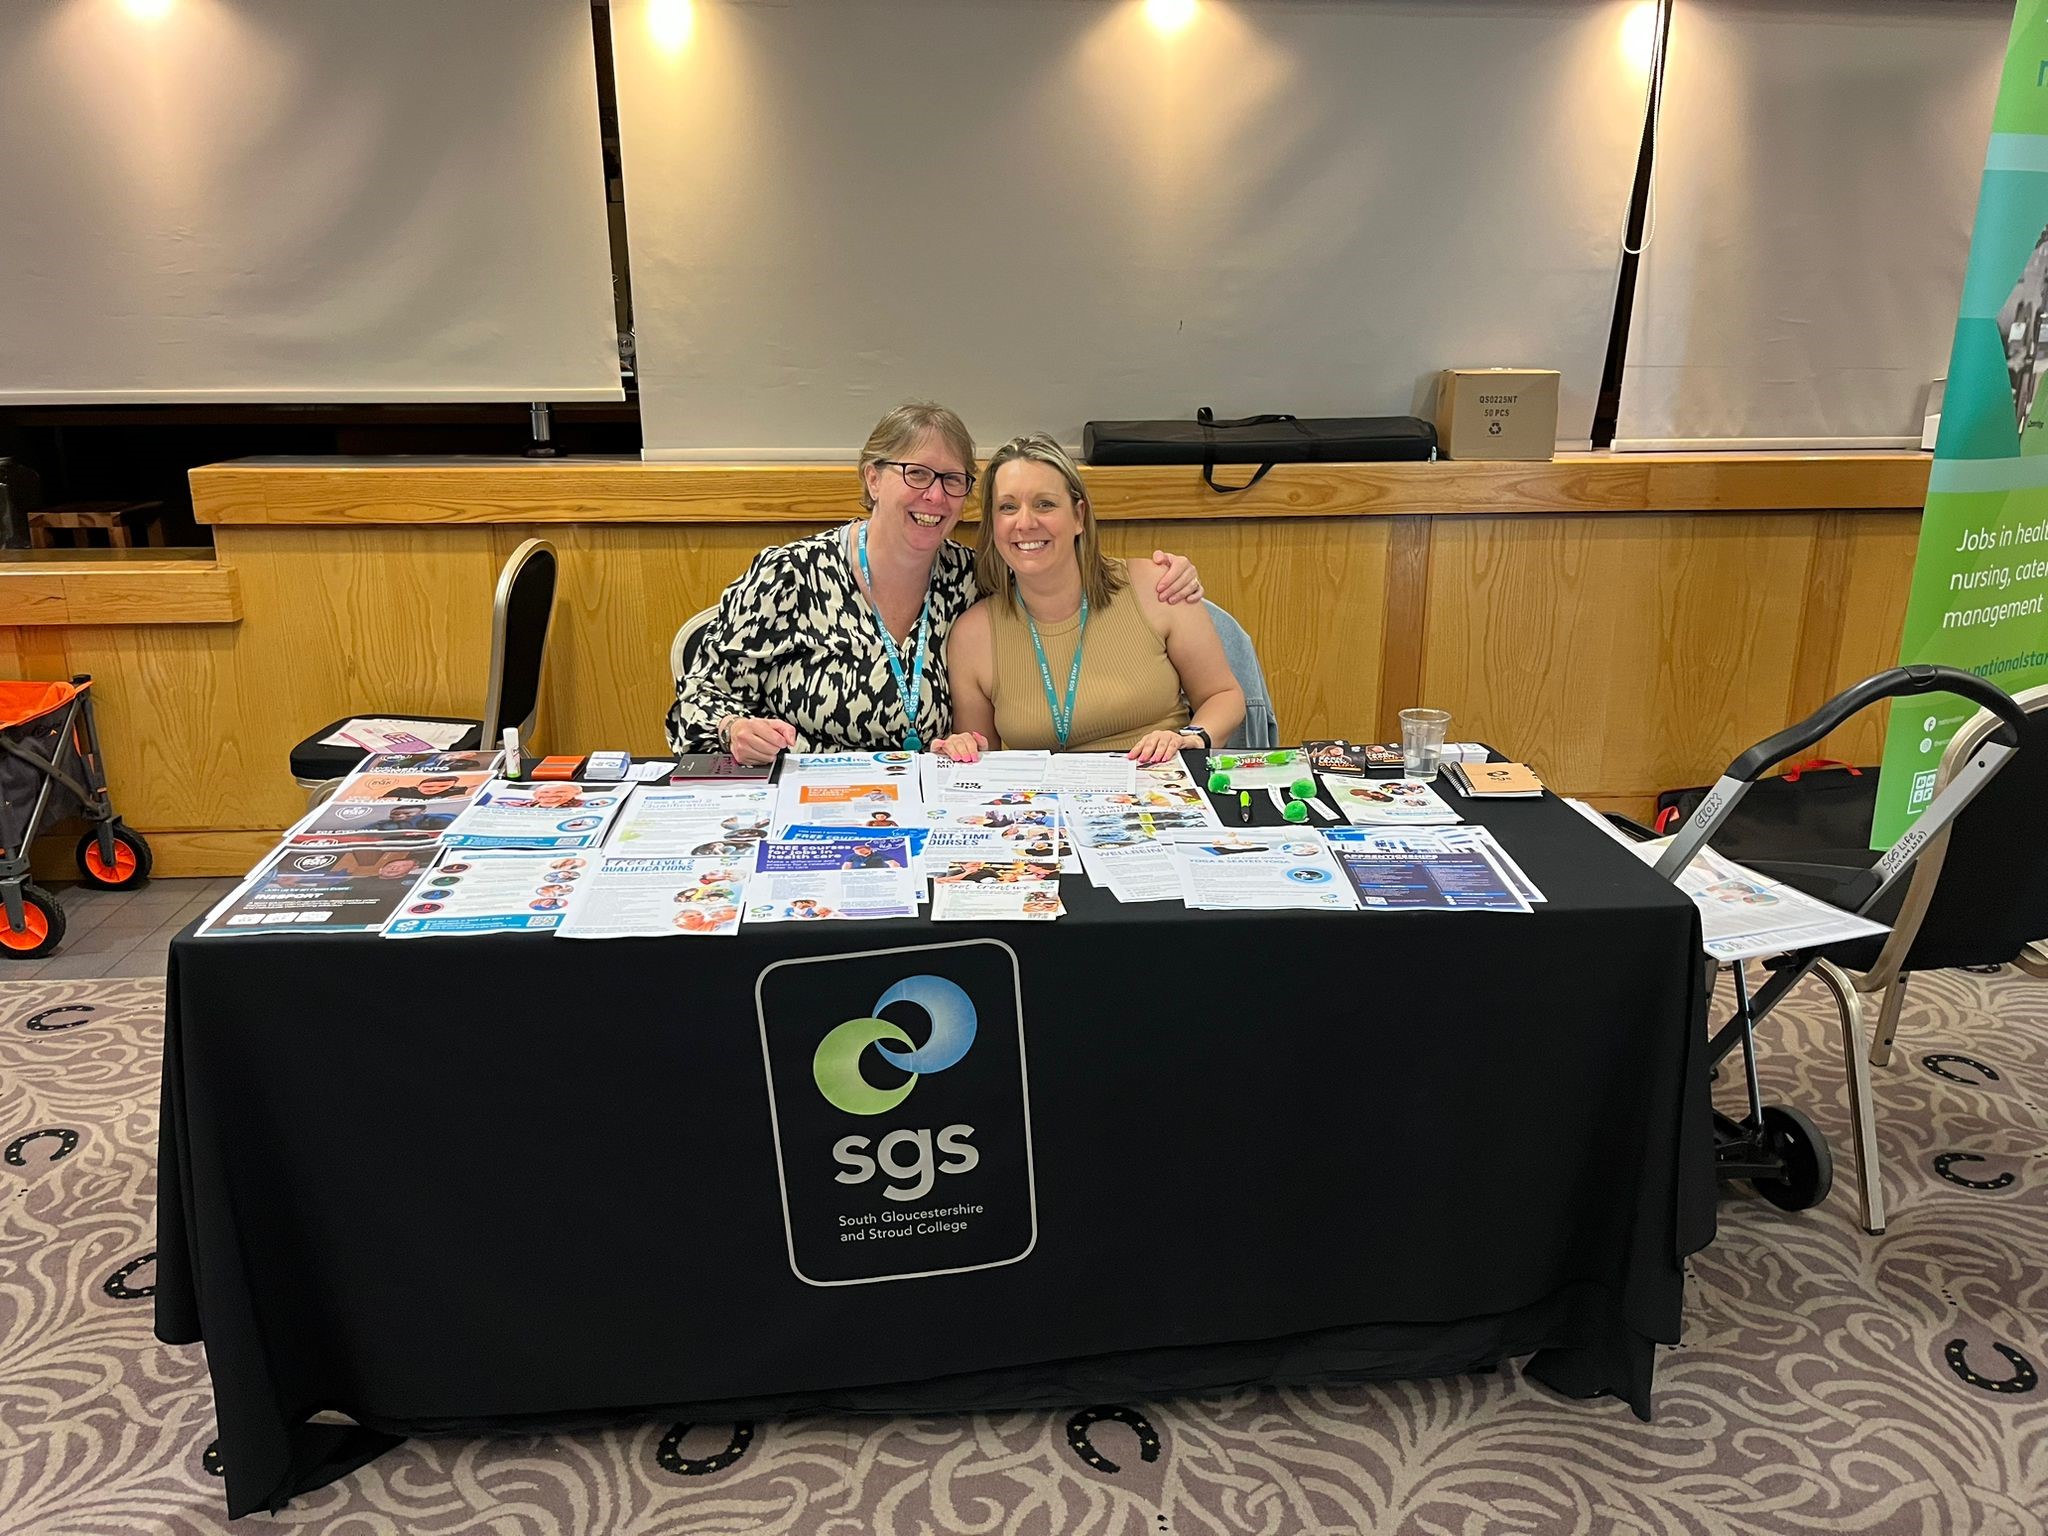 SGS College at our event in Cheltenham & Gloucester